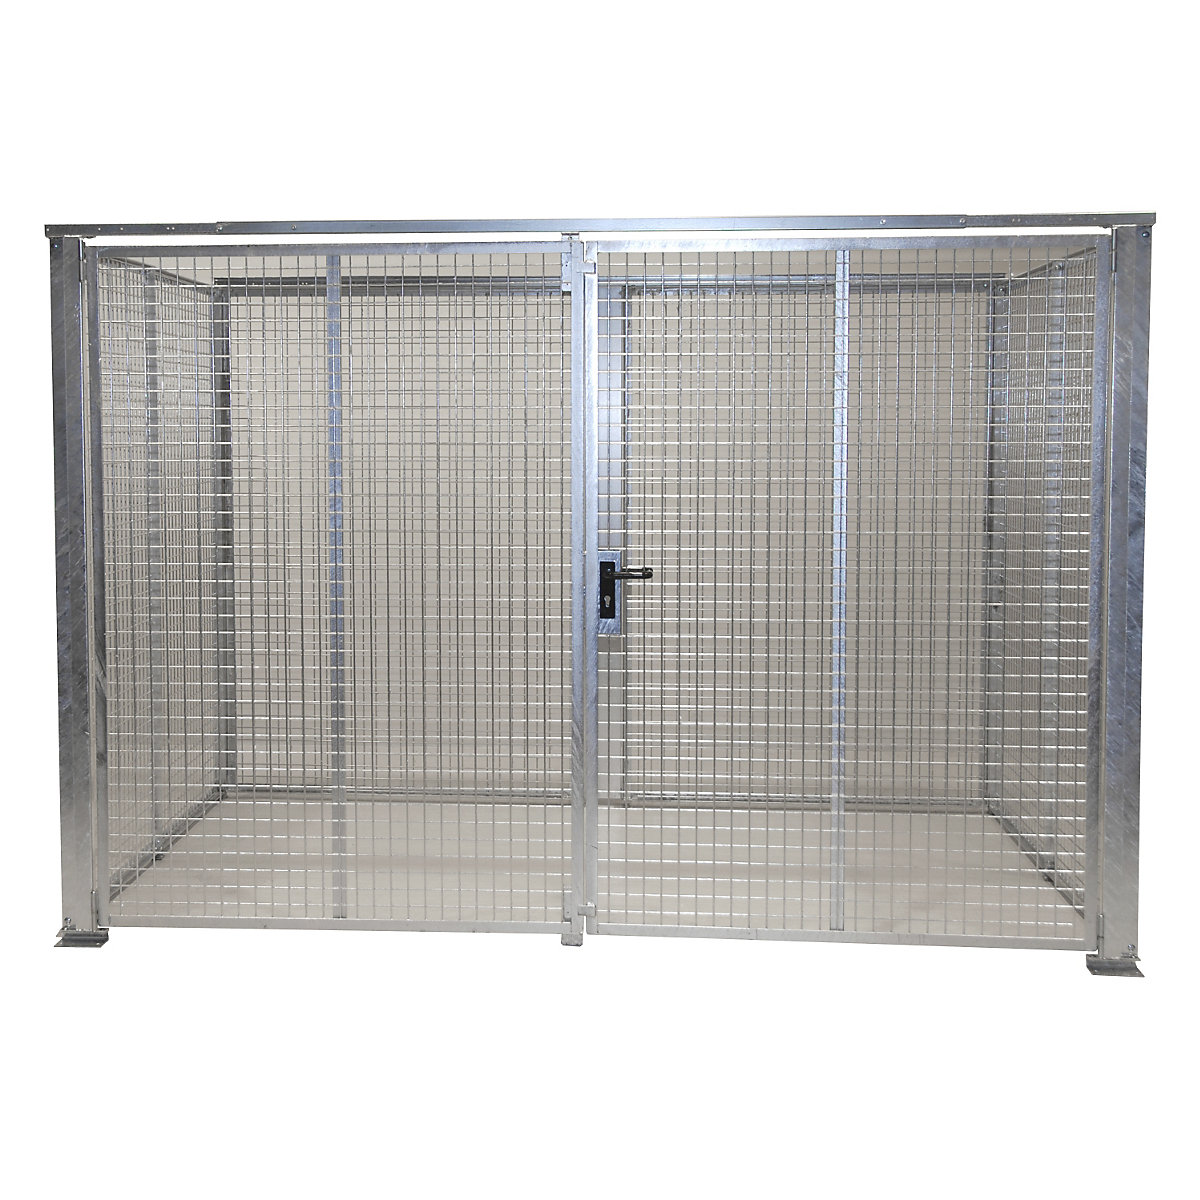 EUROKRAFTpro – Mesh gas cylinder cage, without roof, with double hinged doors, WxD 3100 x 2100 mm